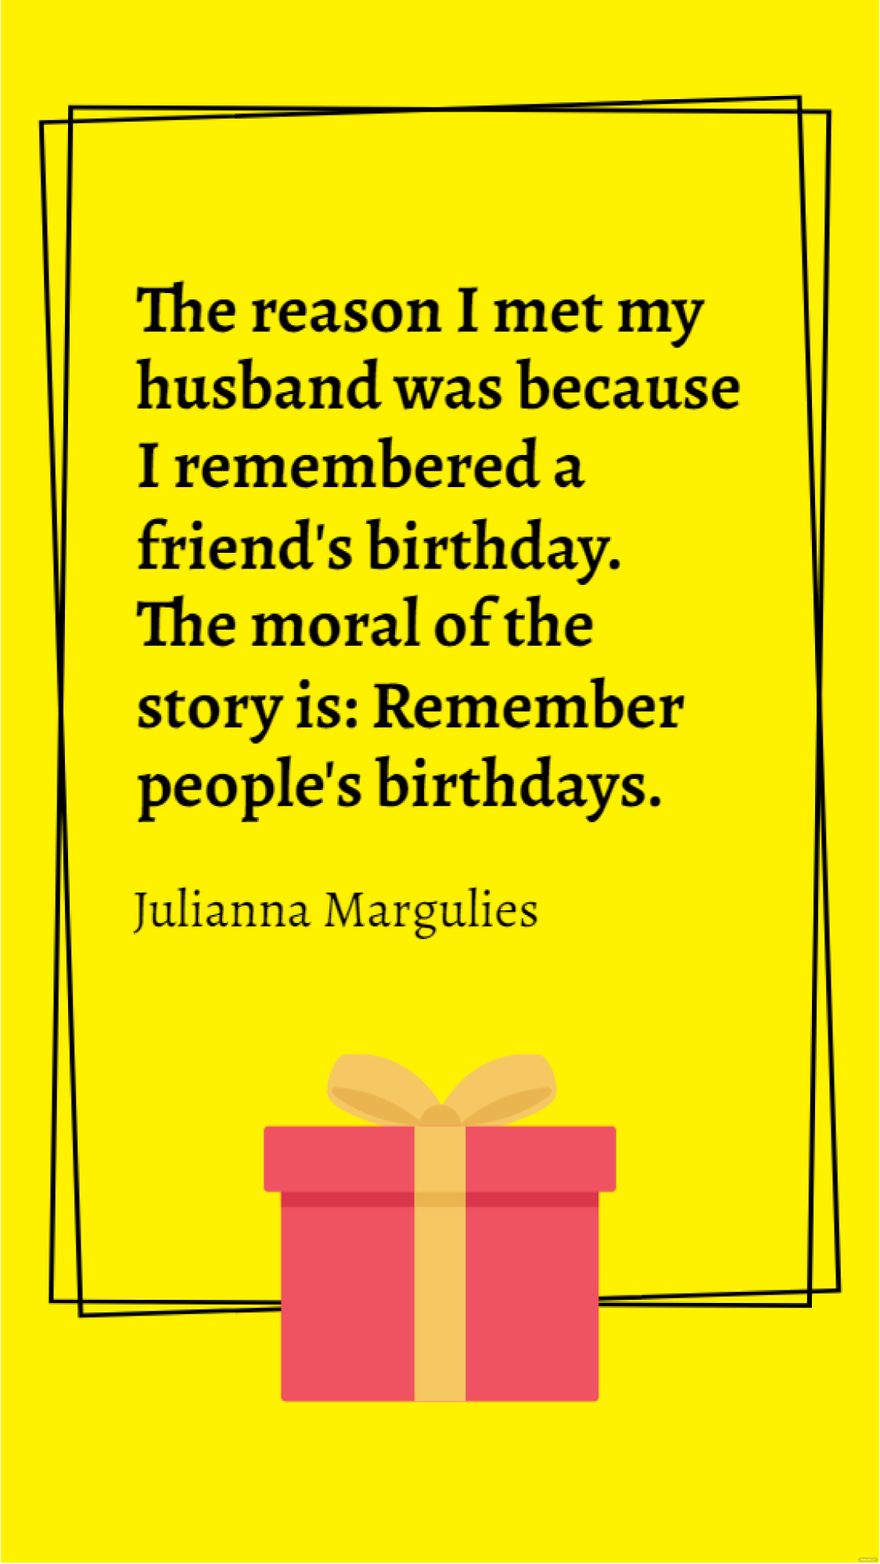 Julianna Margulies - The reason I met my husband was because I remembered a friend's birthday. The moral of the story is: Remember people's birthdays. in JPG